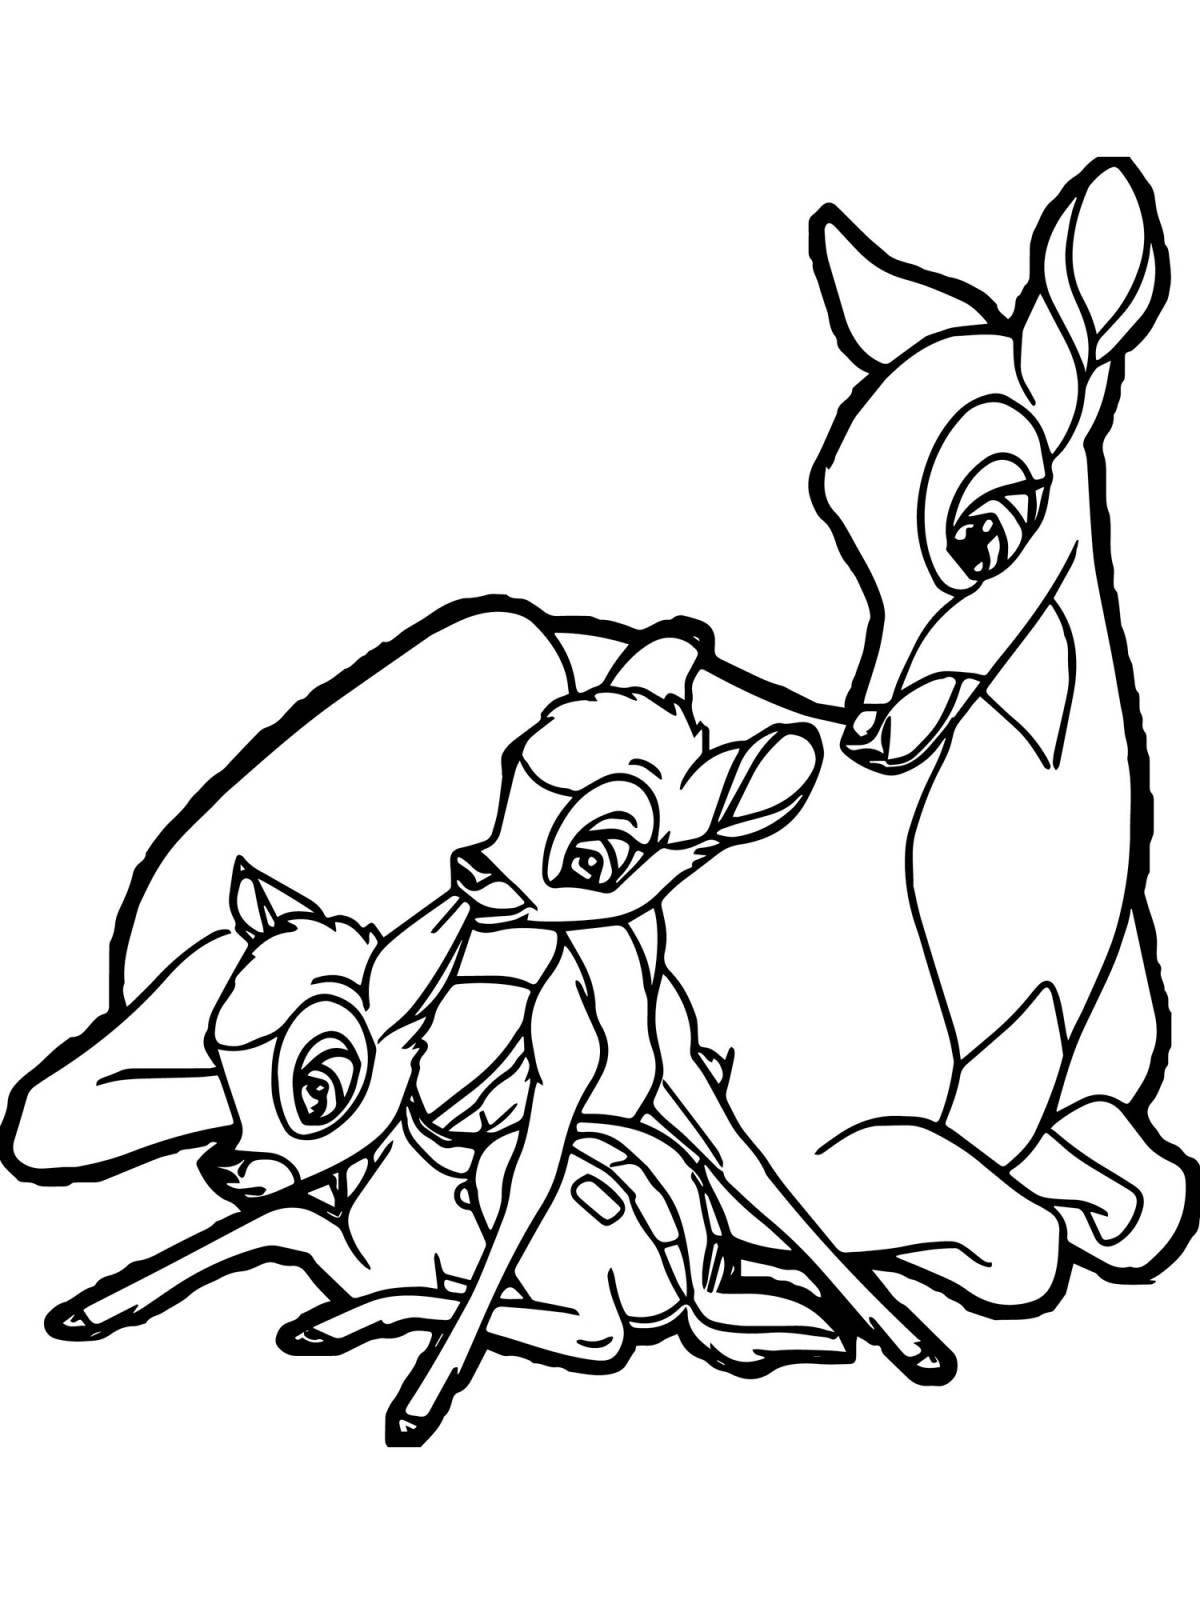 Charming bambi fawn coloring page